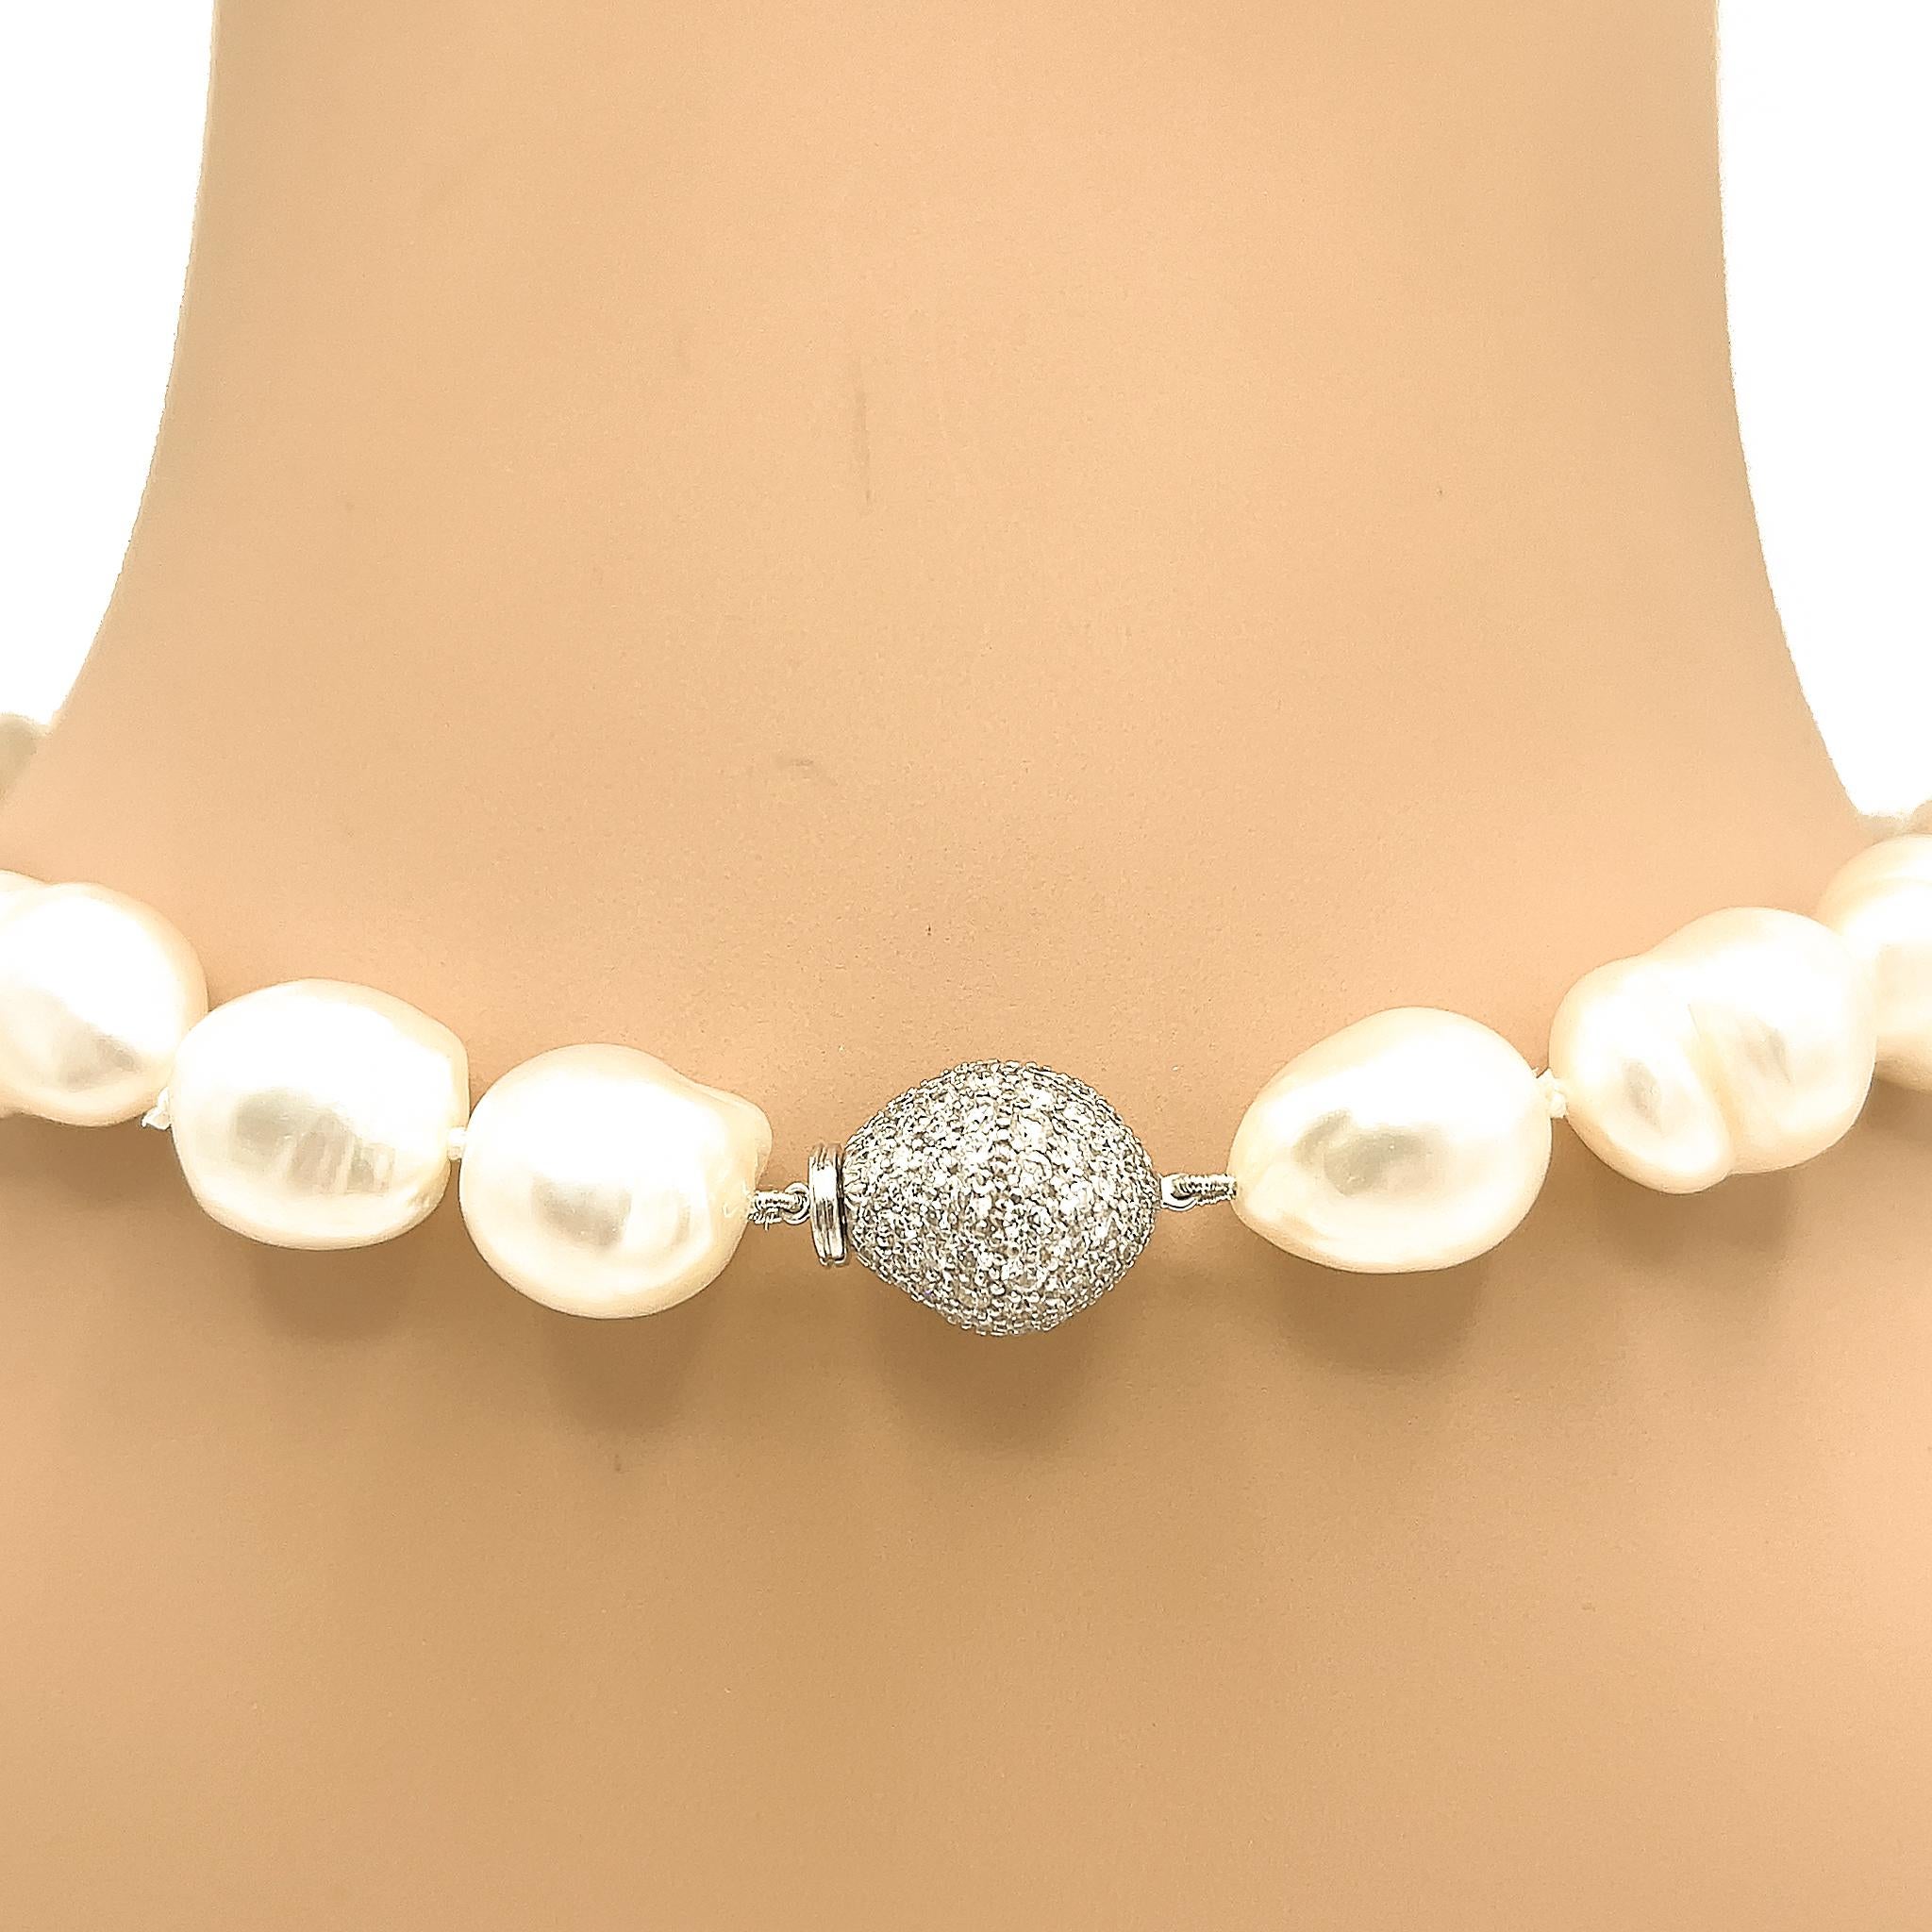 Baroque Pearls: 12-15 mm
Diamond Clasp: 3 ct twd
Length: 18 inches